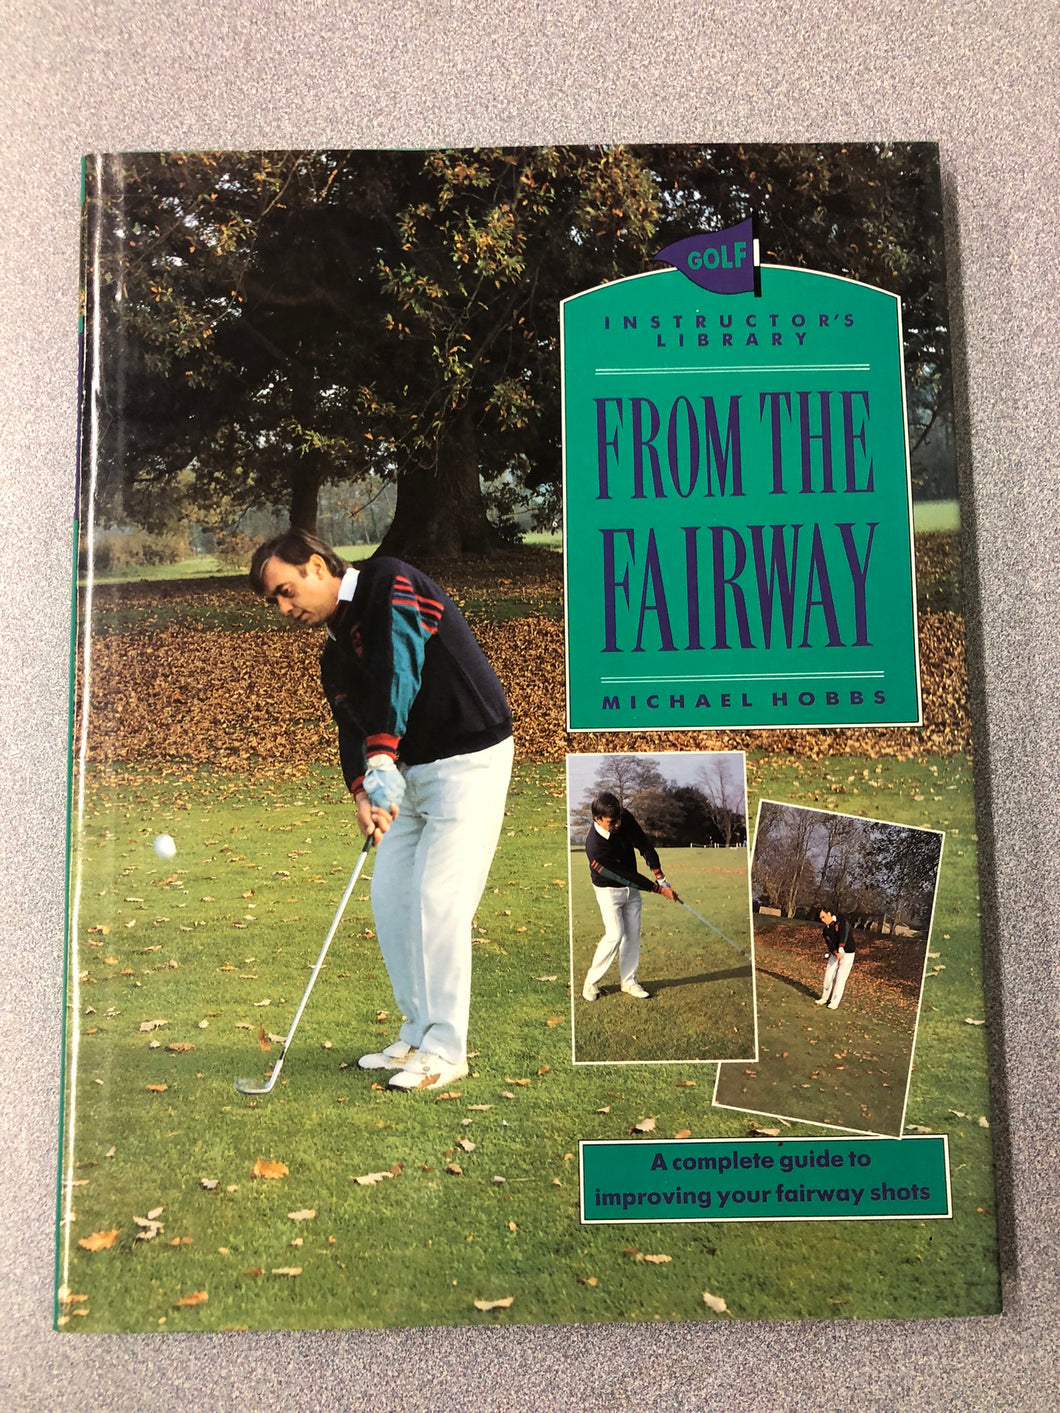 Golf Instructor's Library: From the Fairway: a Complete Guide to Improving Your Fairway Shots, Hobbs, Michael [1991] OU 7/22